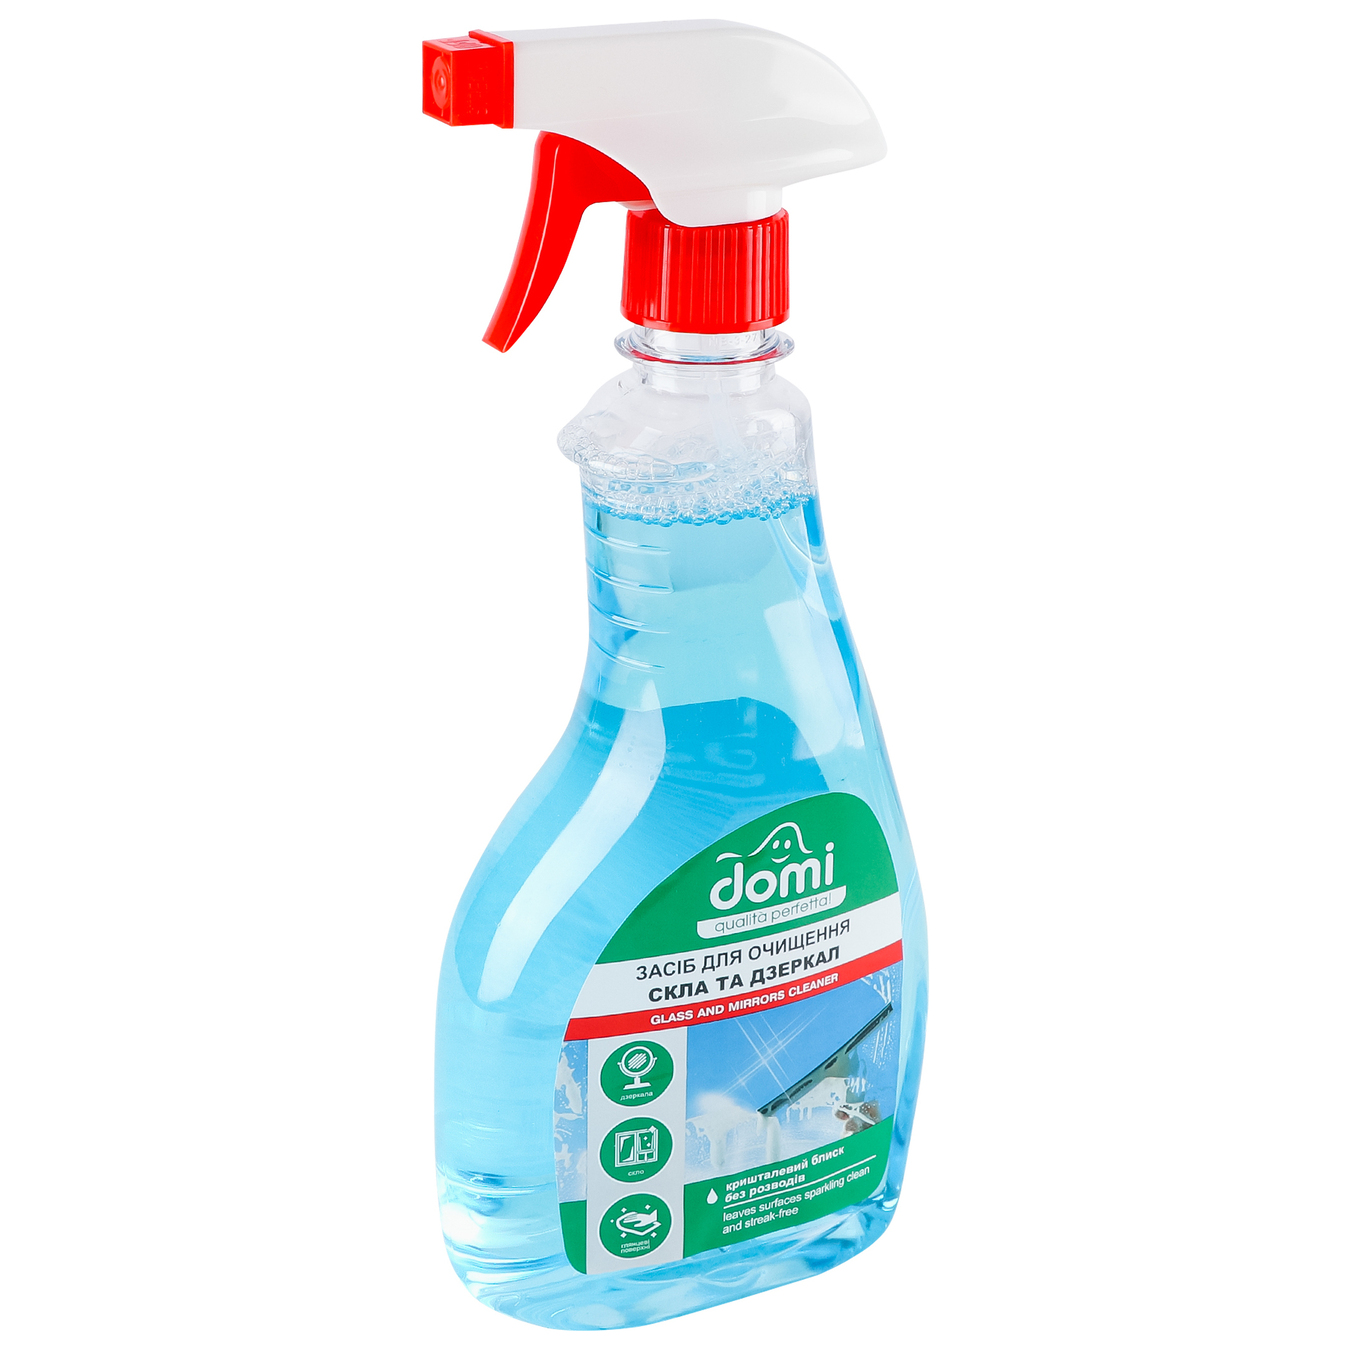 Glass and mirror cleaner Domi 500ml 4